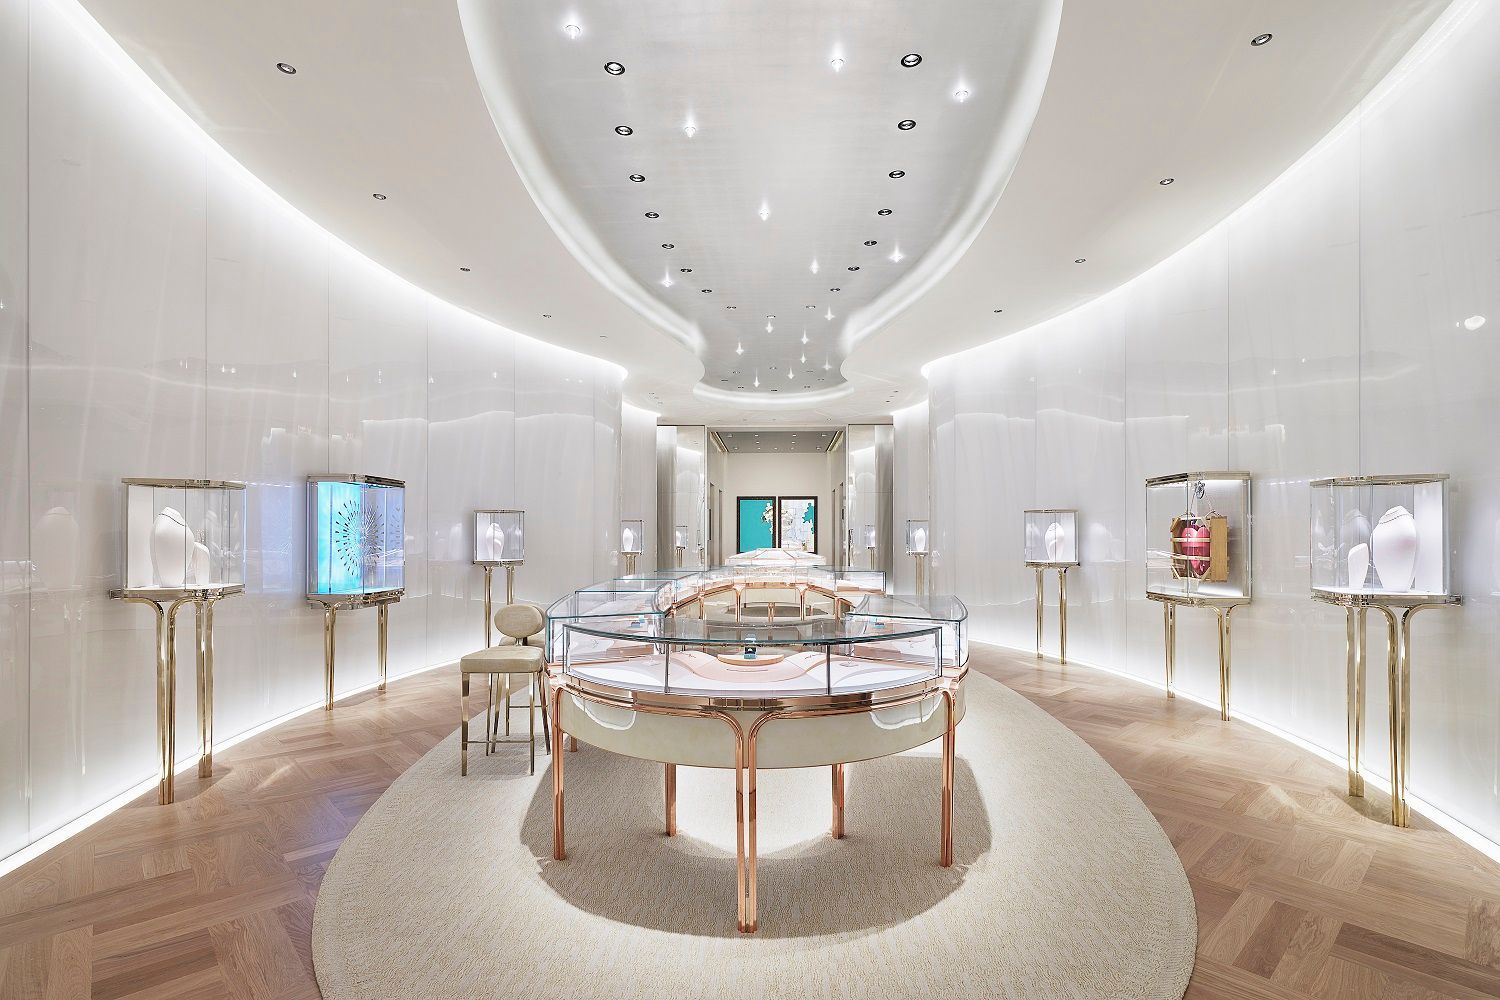 Tiffany & Co. Is Finally Reopening After 4 Years